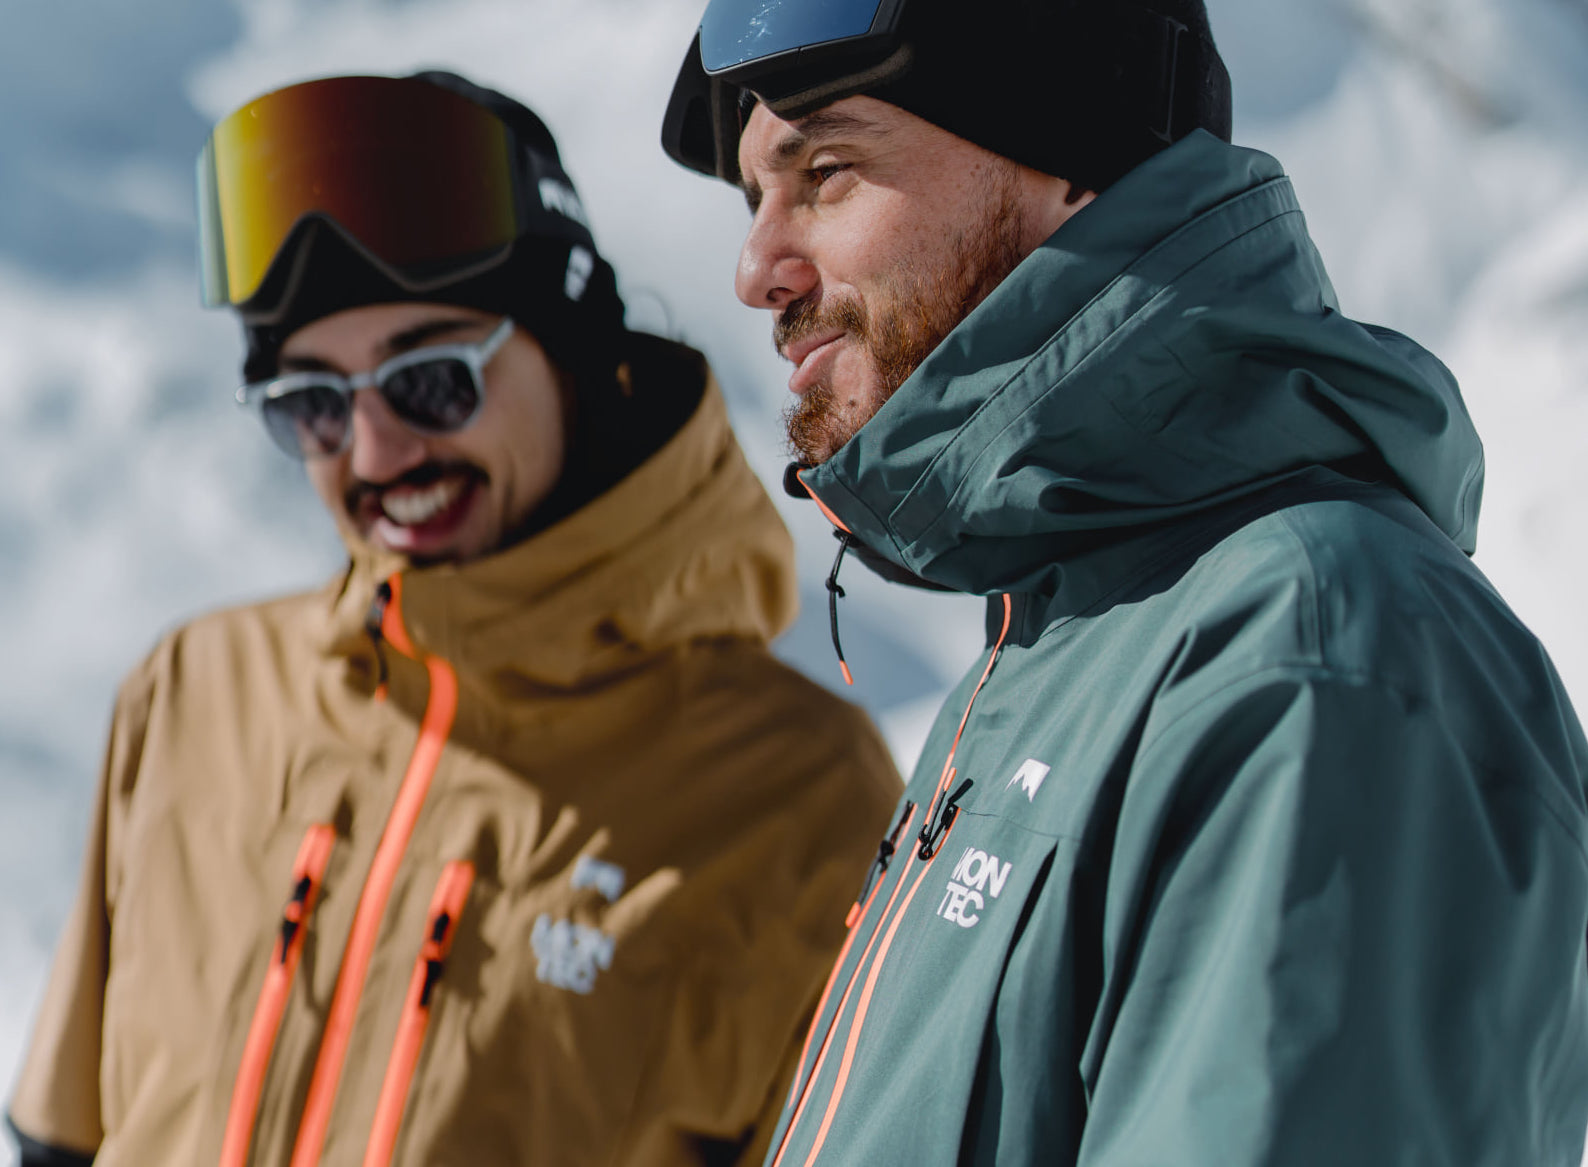 6 of the best ski wear pieces from MONTEC